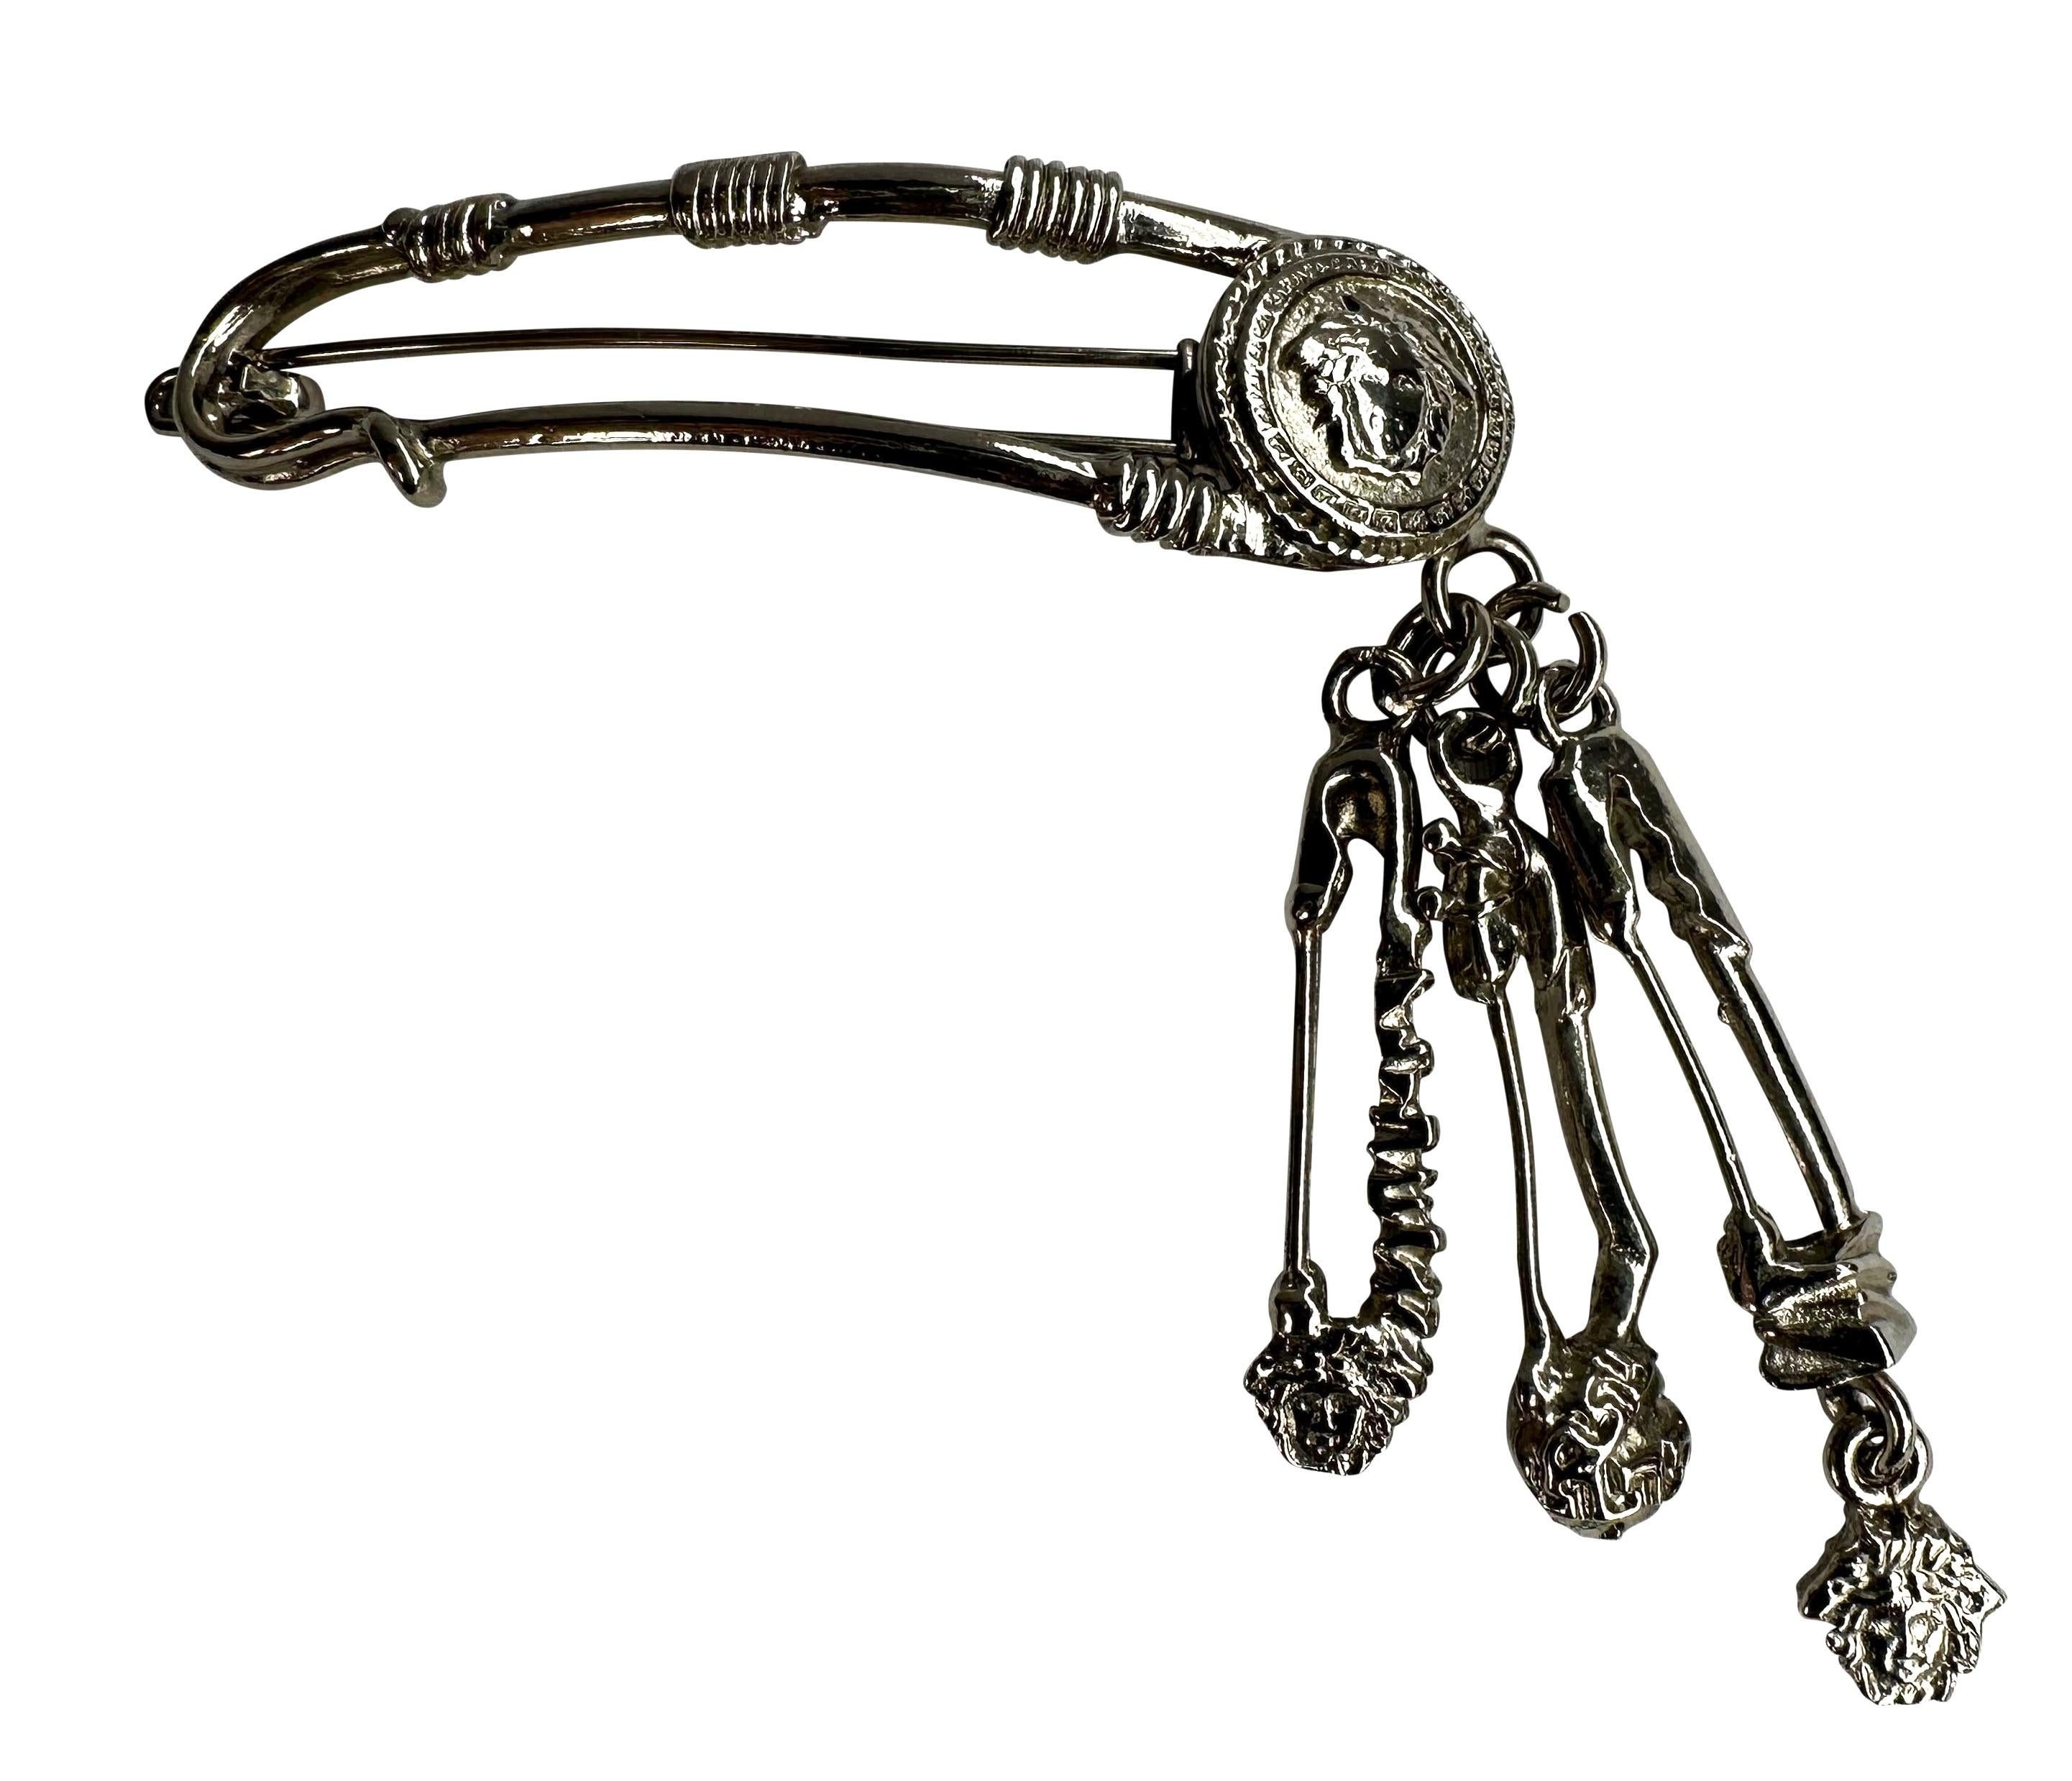 Presenting an incredible silver-tone Gianni Versace Medusa hair clip, designed by Gianni Versace. From the Spring/Summer 1994 collection, this oversized safety pin barrette is covered in Versace Medusa logos and is made complete with additional